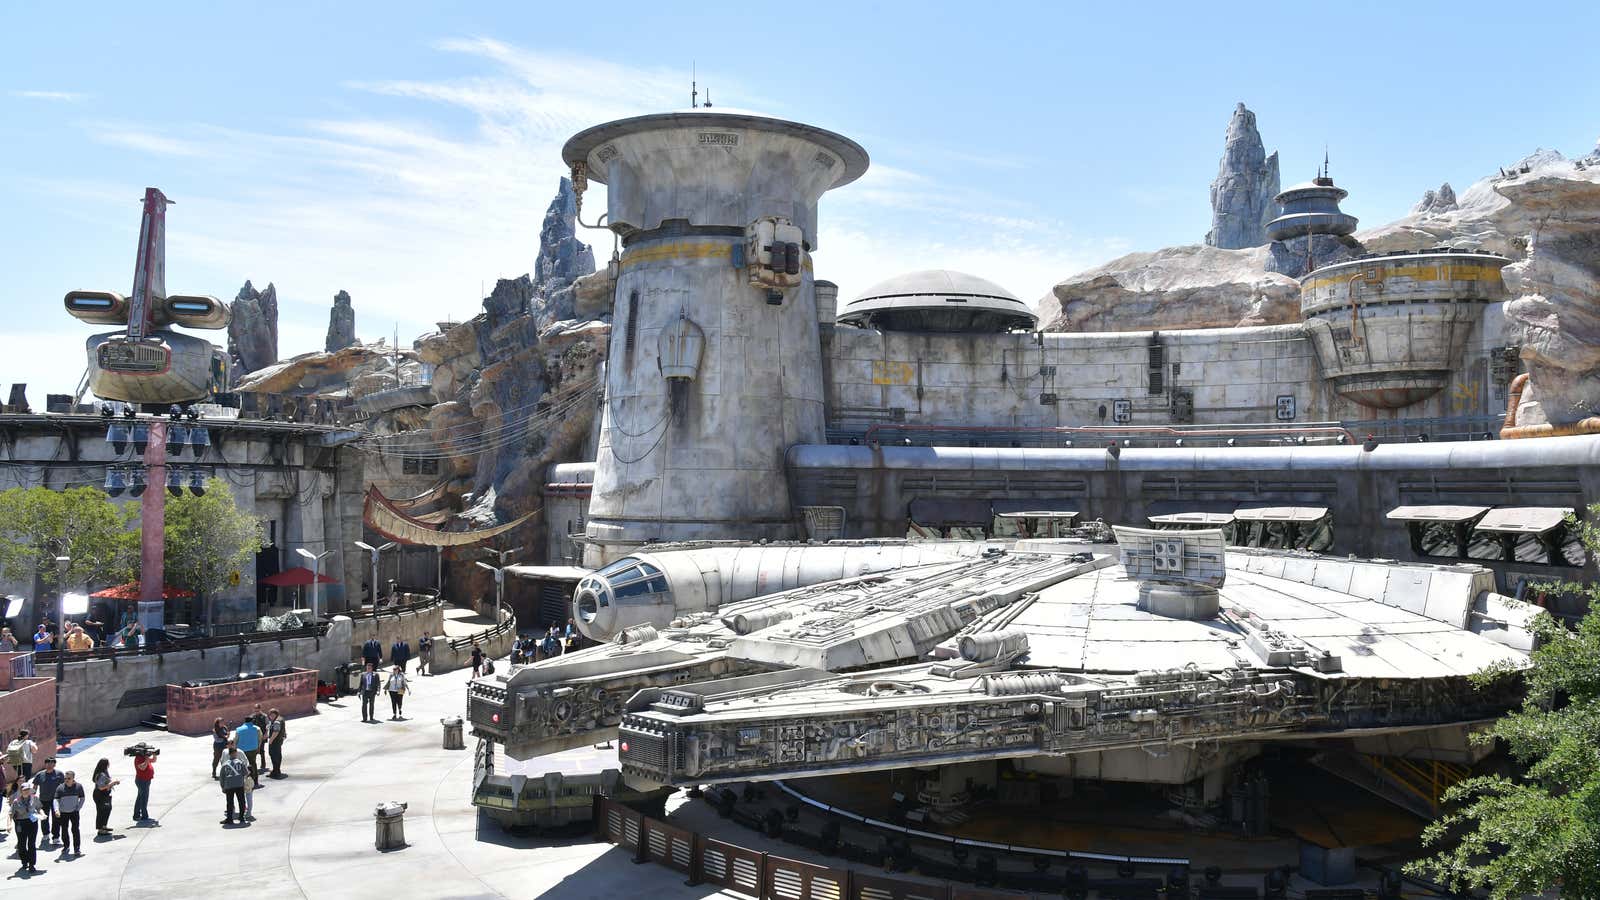 The Millennium Falcon at the Star Wars: Galaxy’s Edge media preview.